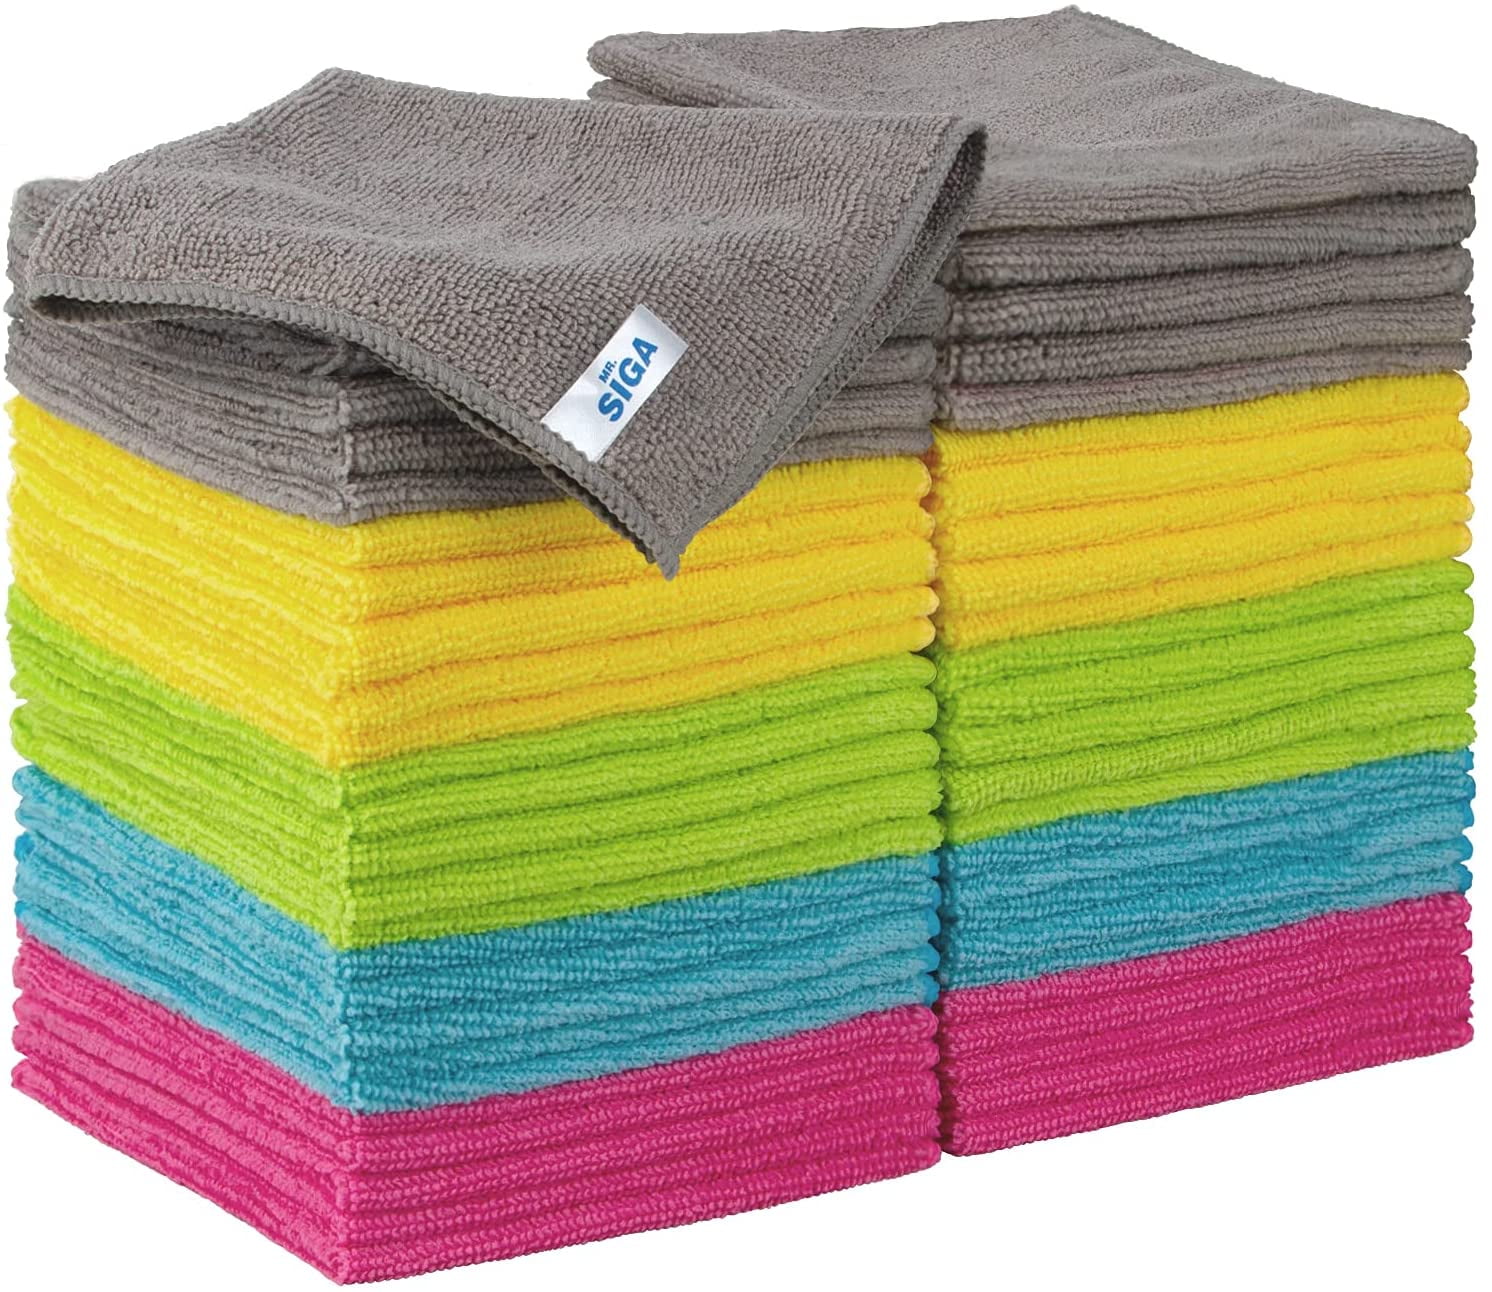 Microfibre all purpose household cleaning cloth 